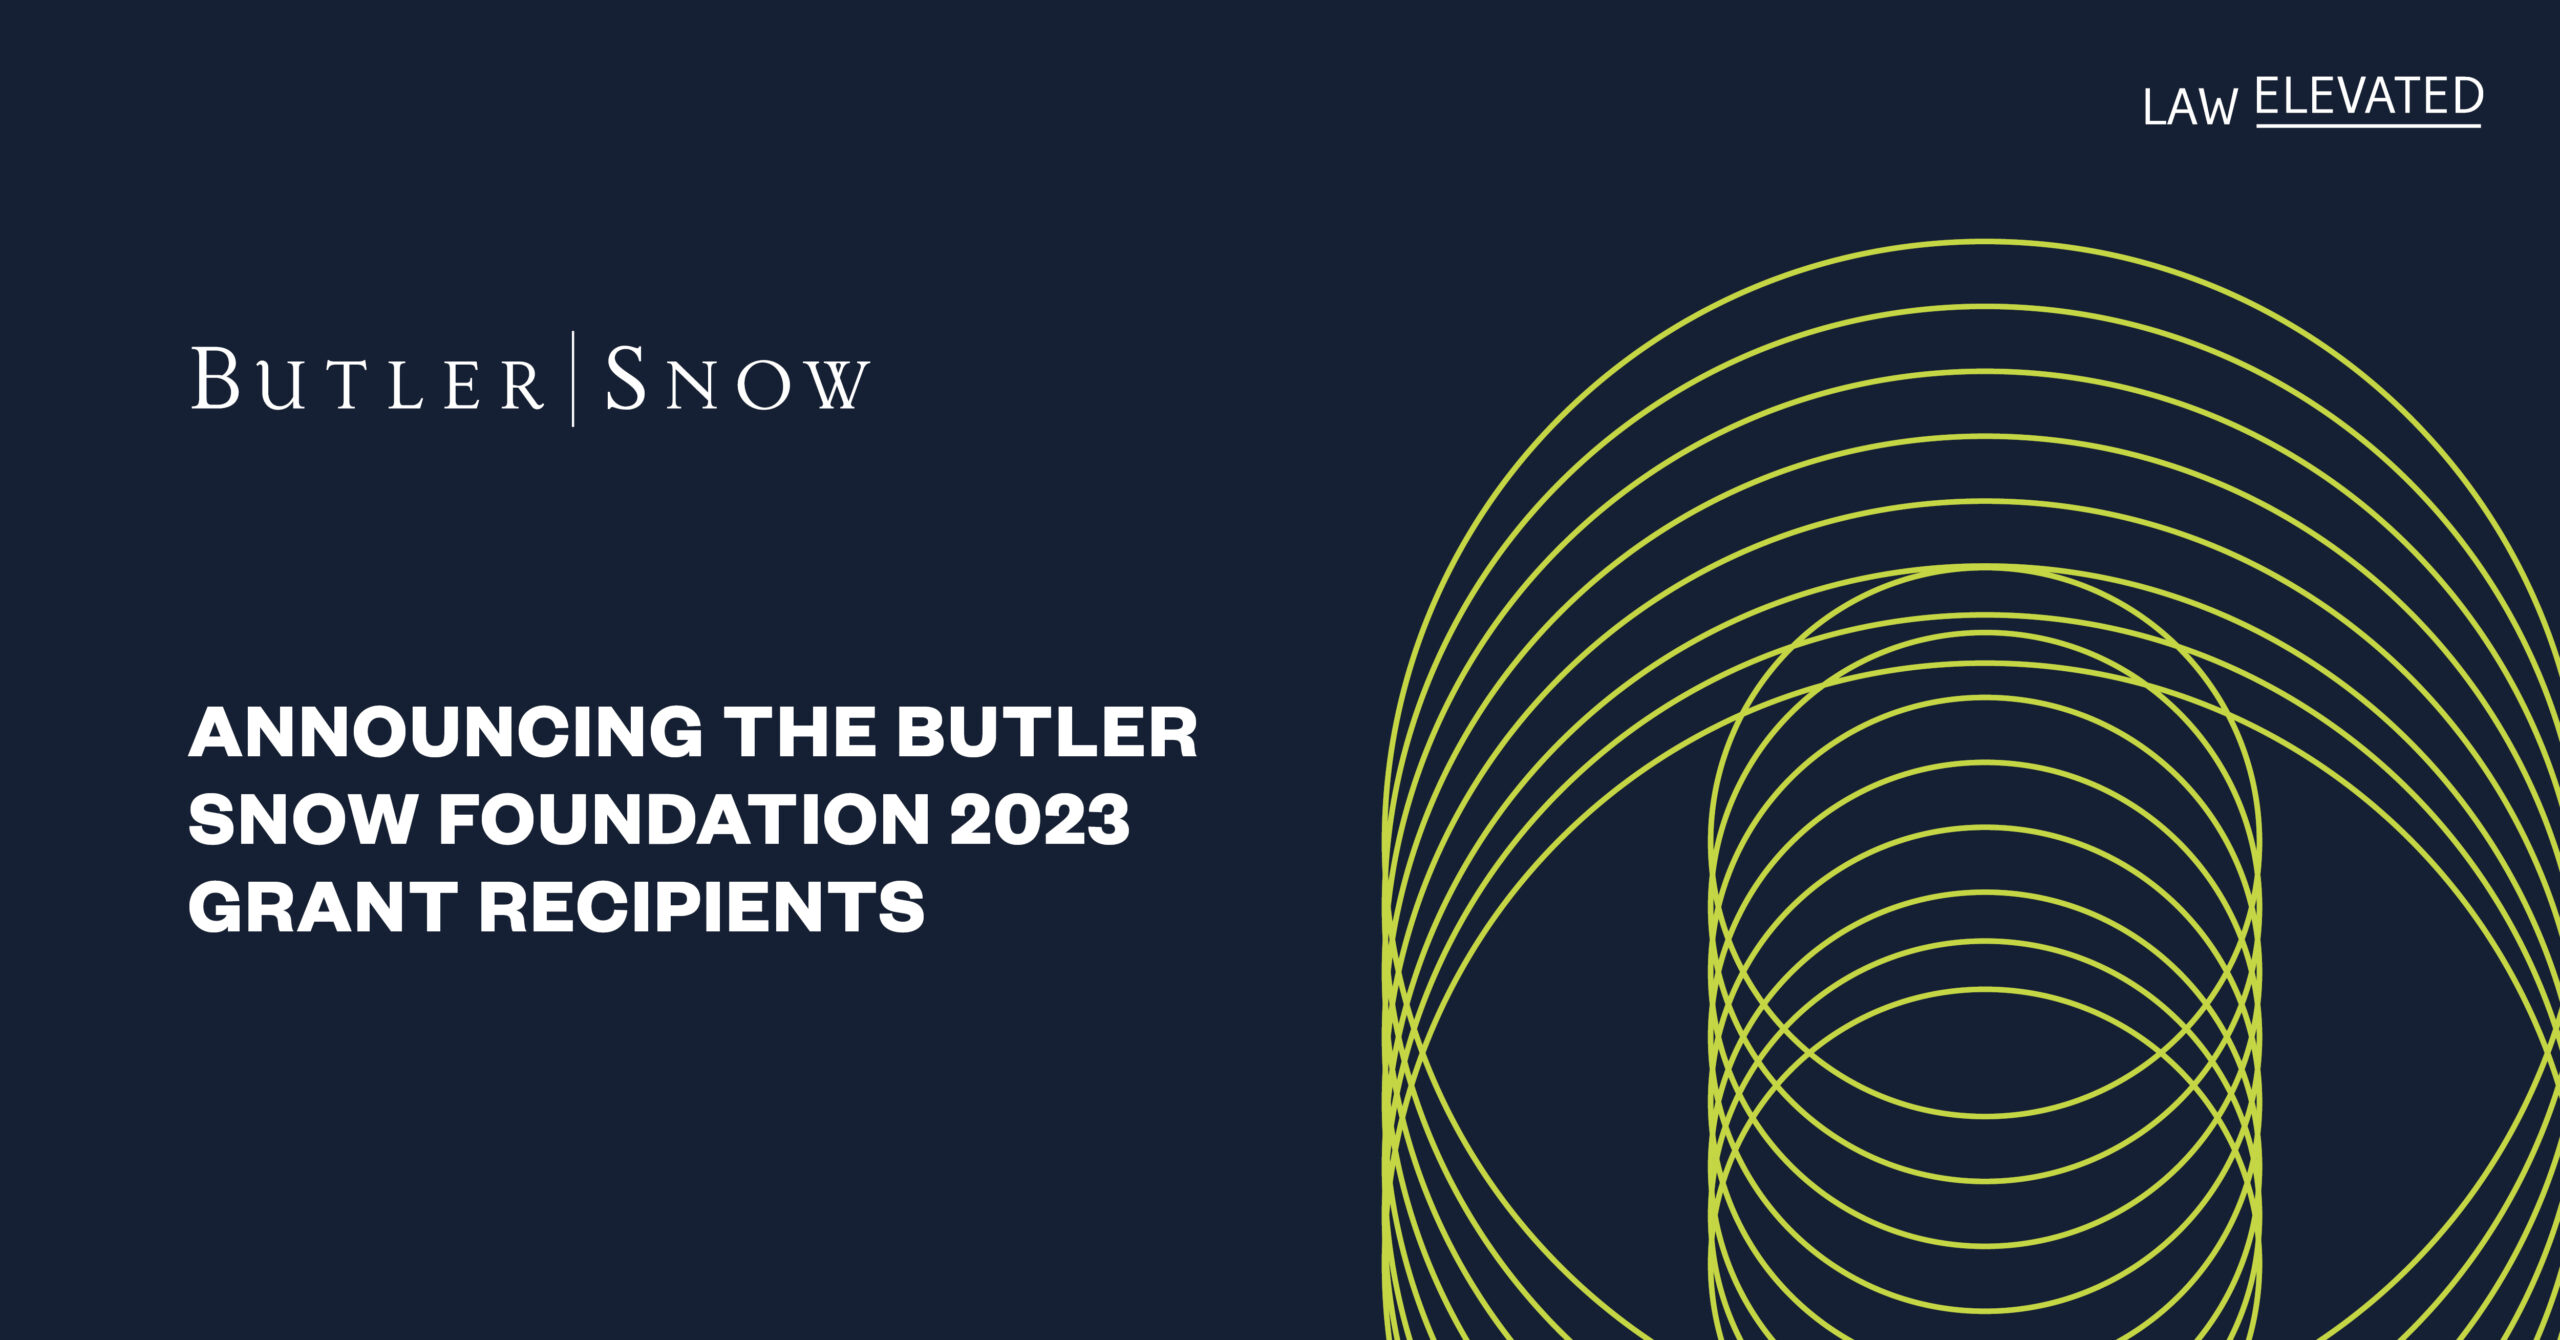 Announcing the Butler Snow Foundation 2023 Grant Recipients